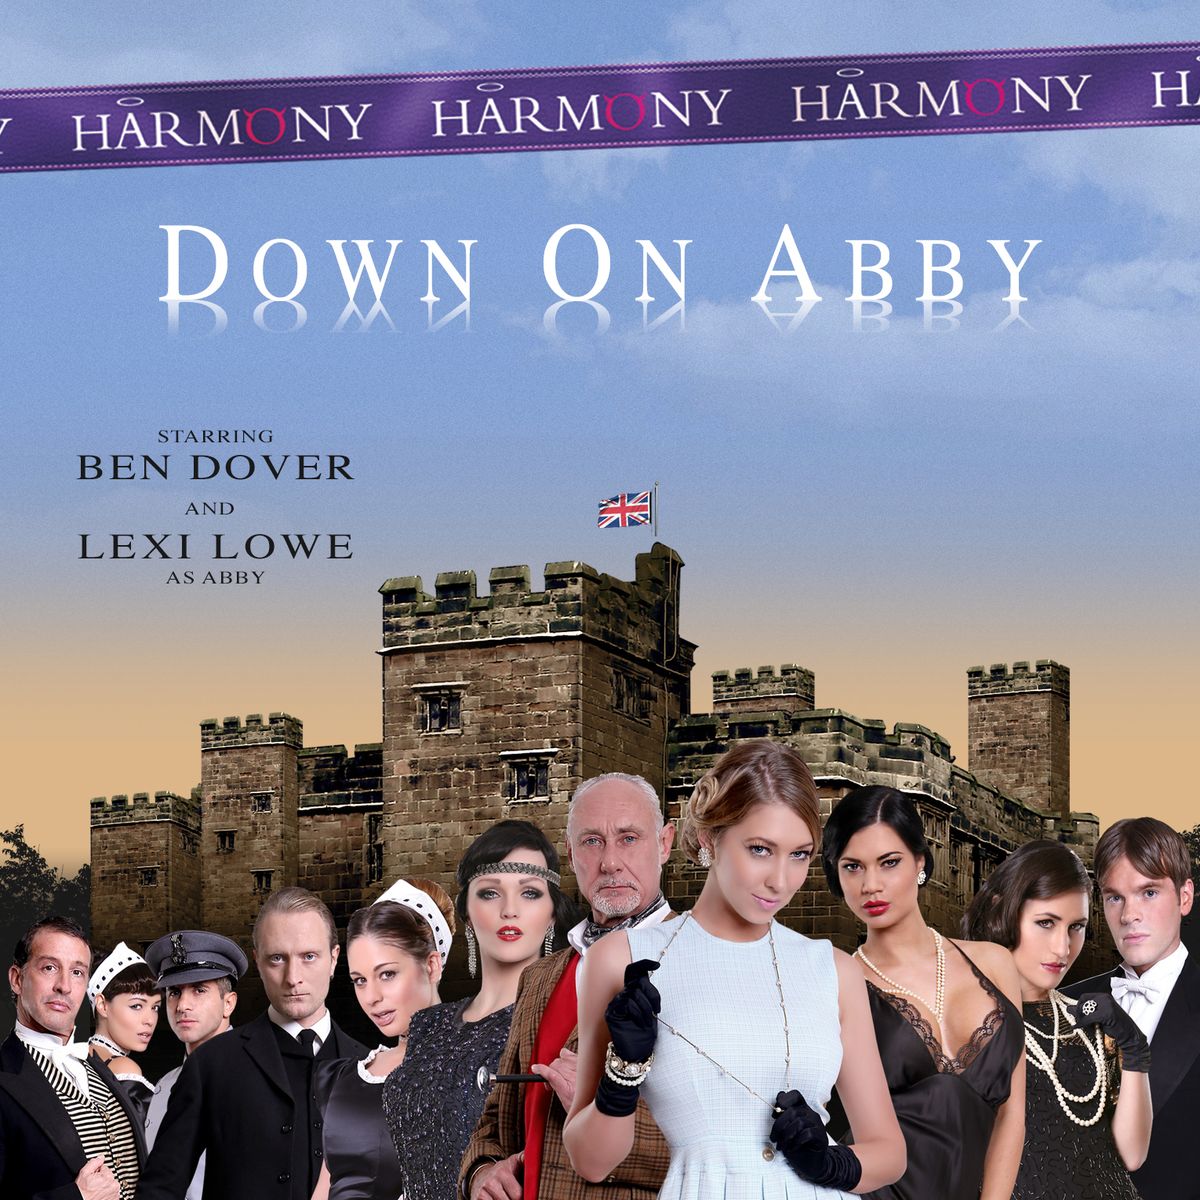 Porn Move Down - Down on Abby porn film gets \